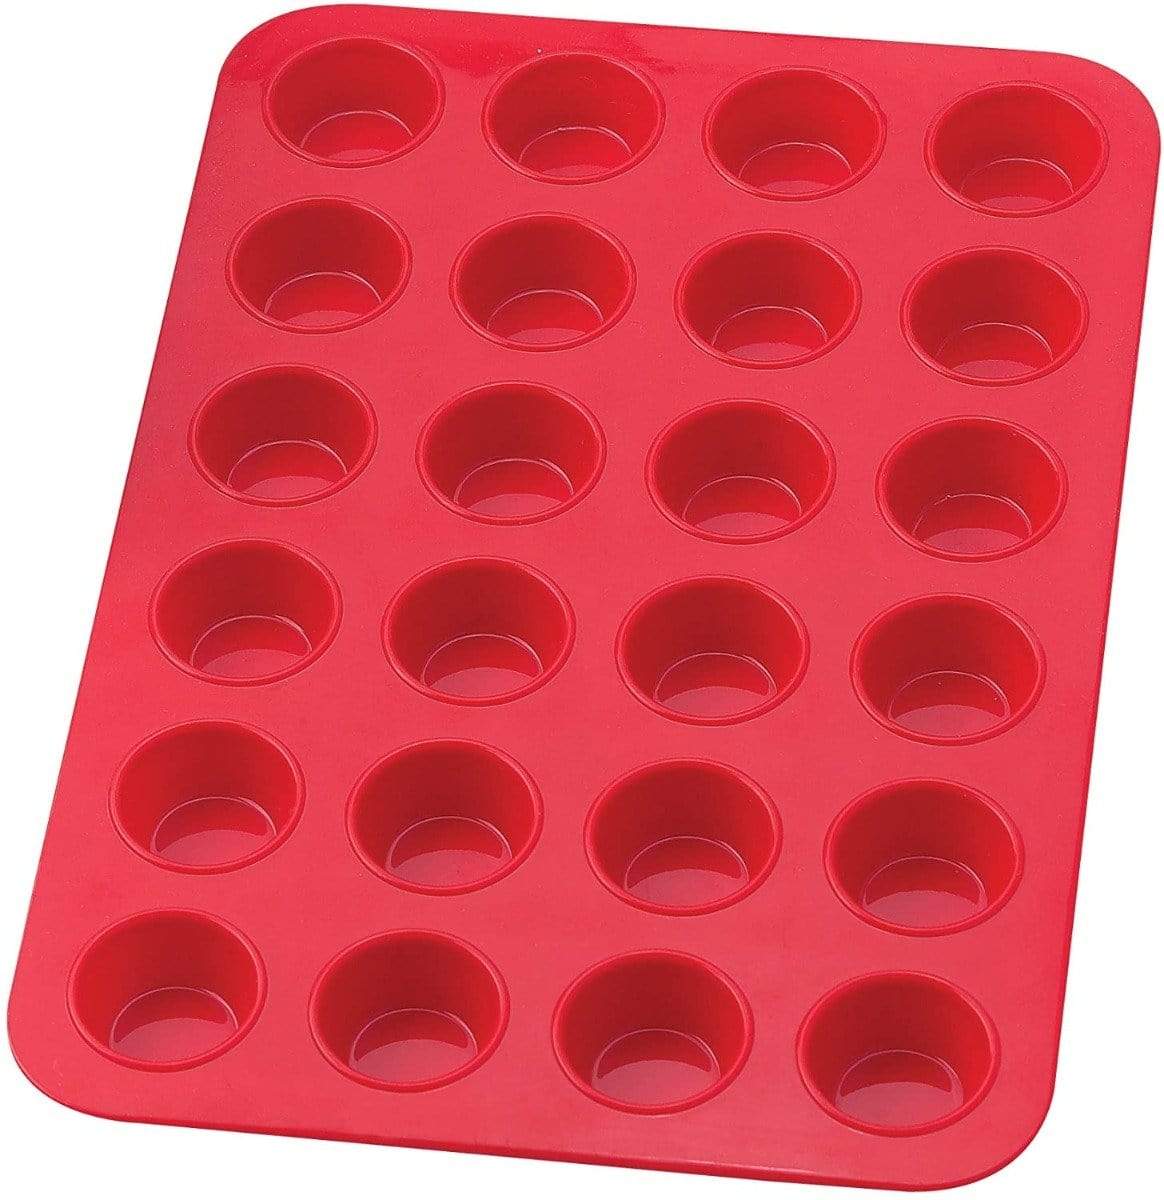 Mrs. Anderson's Muffin Pan Mrs. Anderson's Silicone Mini Muffin Pan